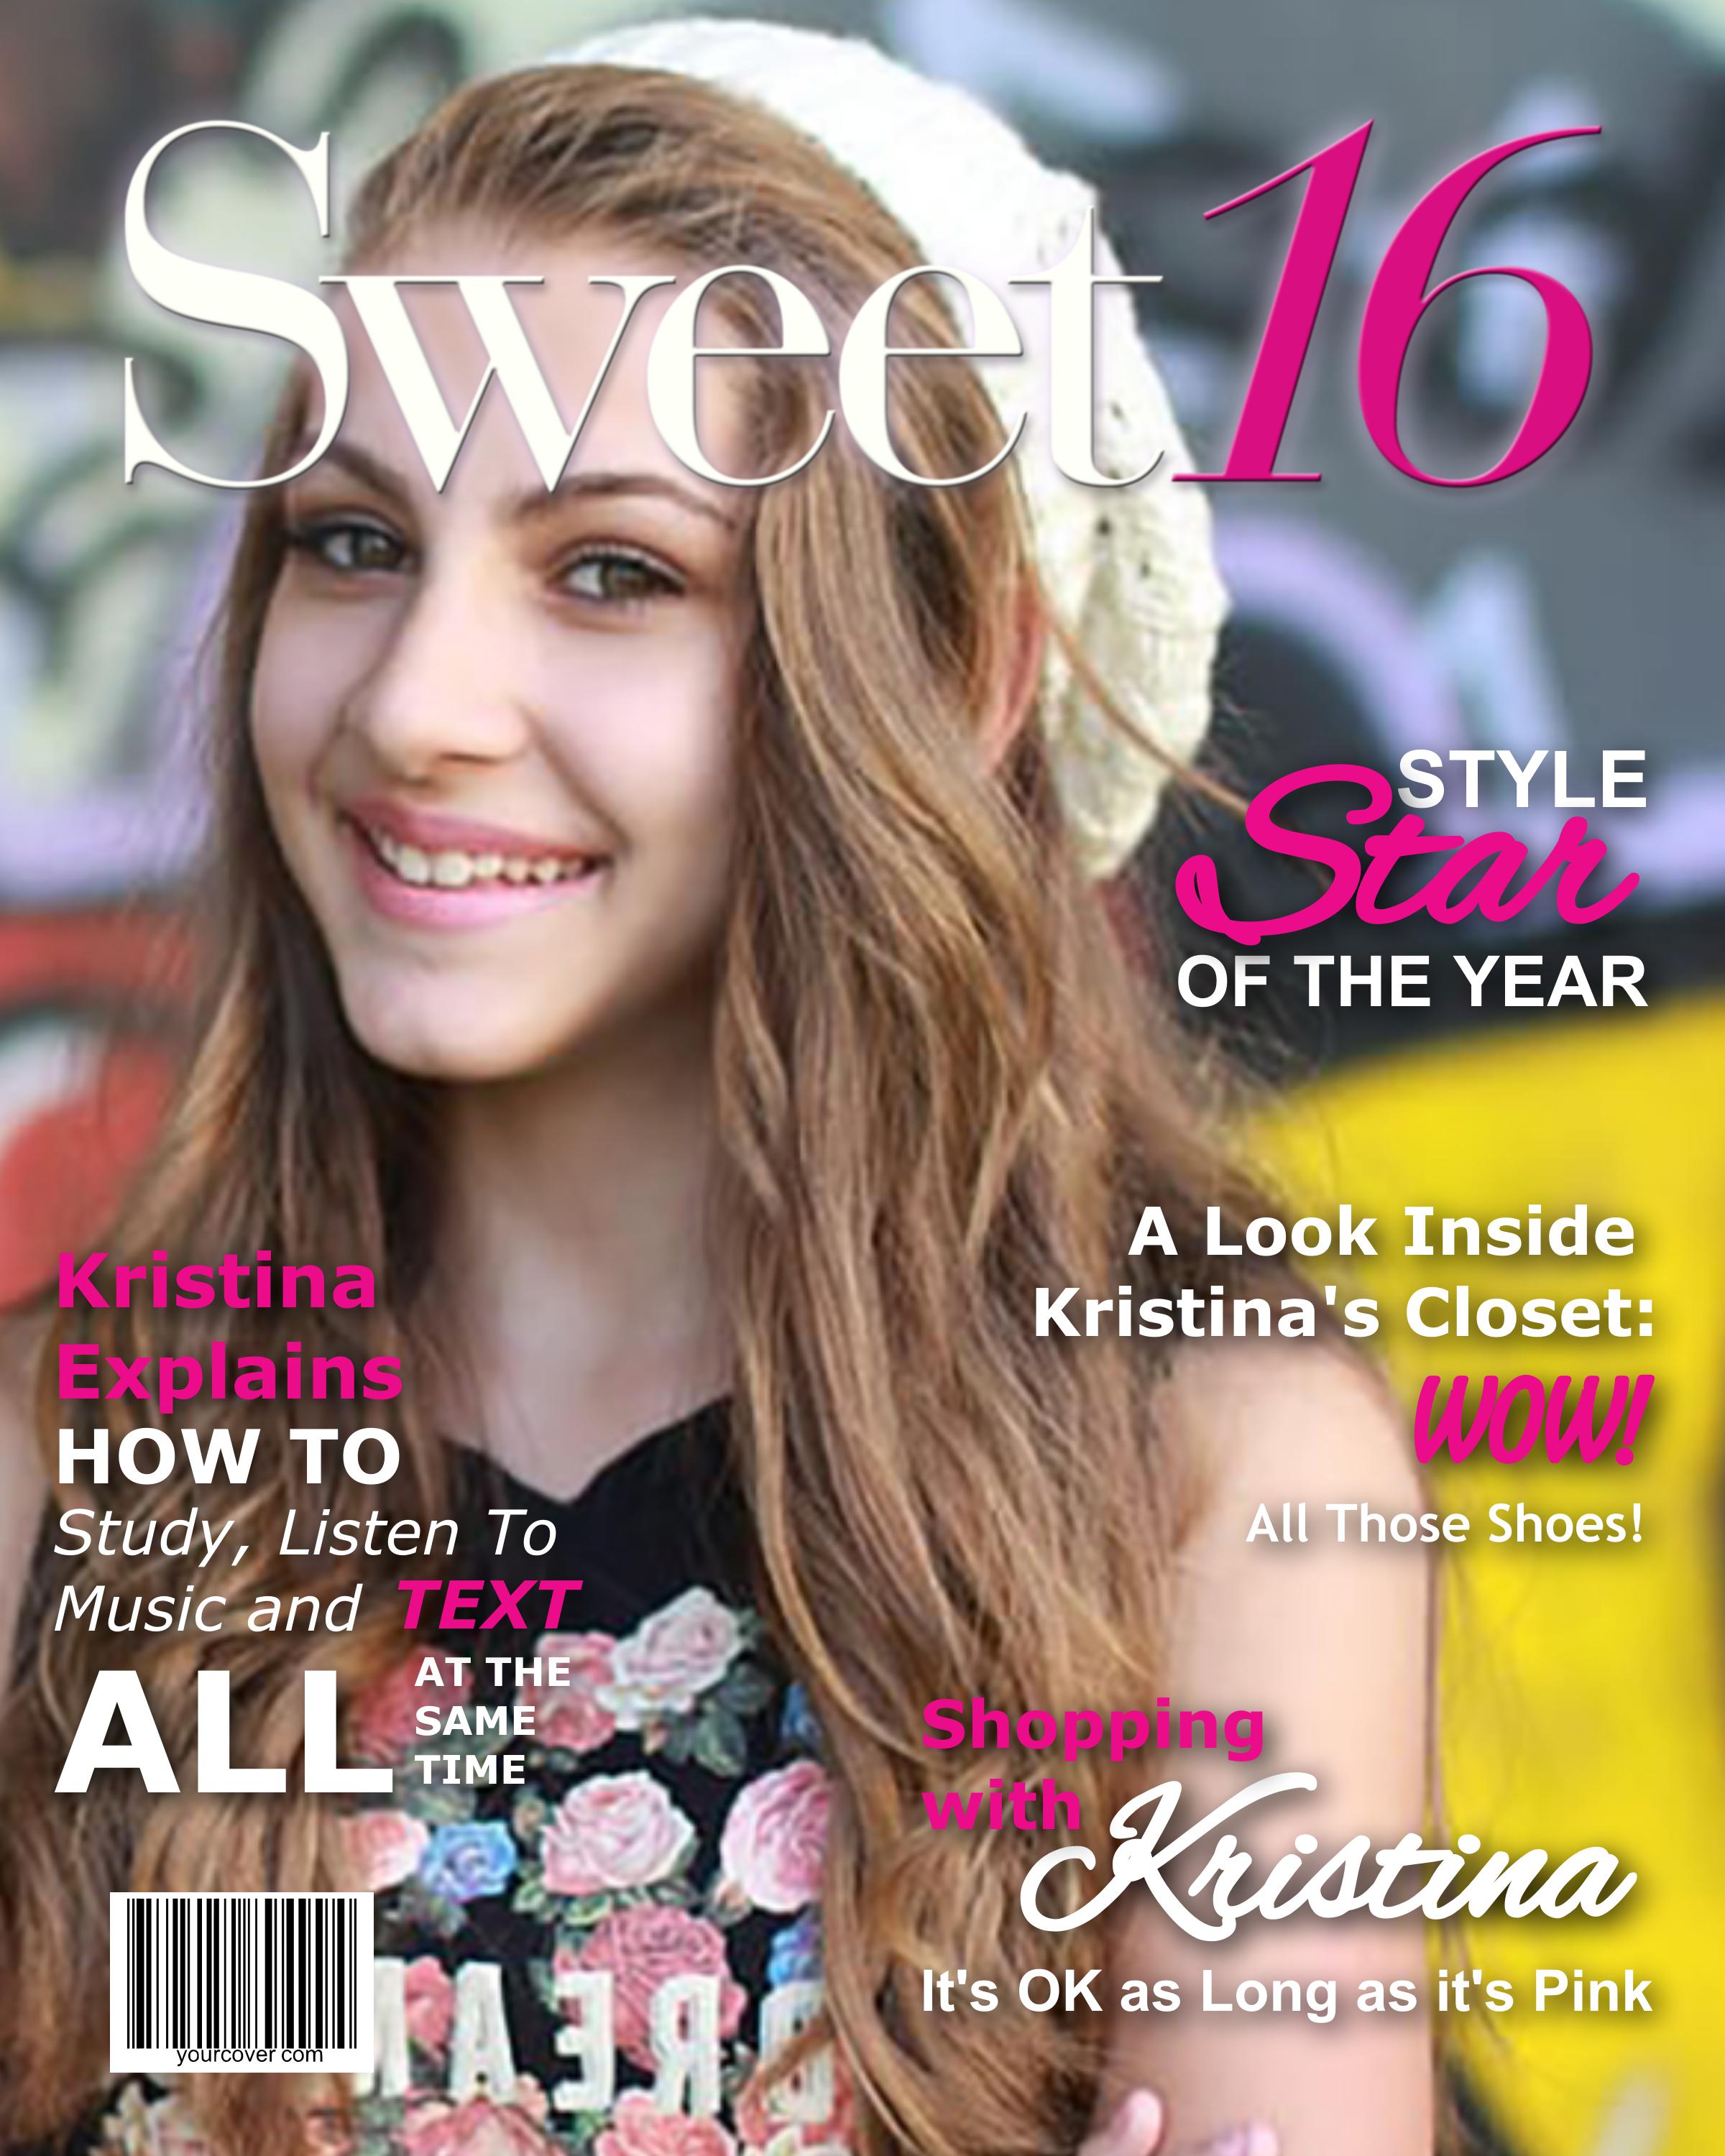 Sweet 16 Yourcover Free personalized magazine covers template